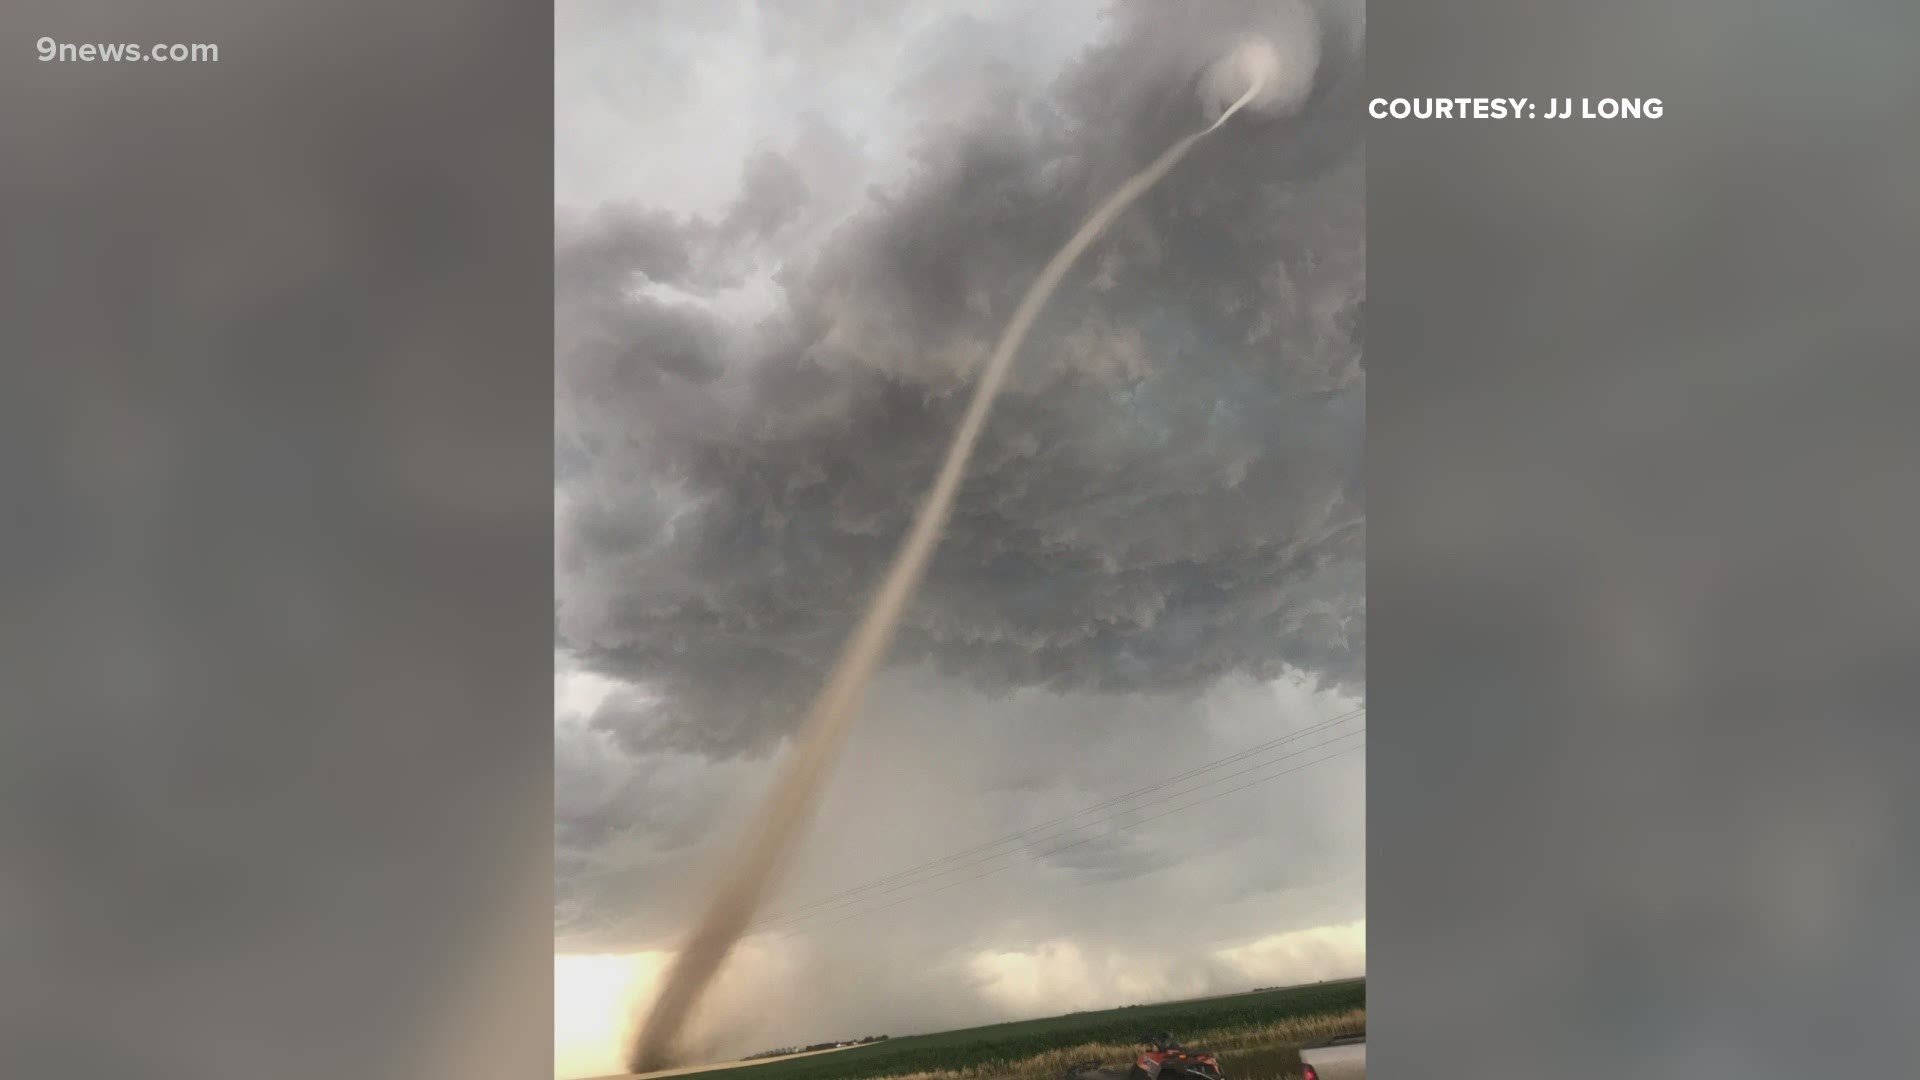 9NEWS received numerous videos of landspout tornadoes on Colorado's Eastern Plains. Here's a look at the science behind them.